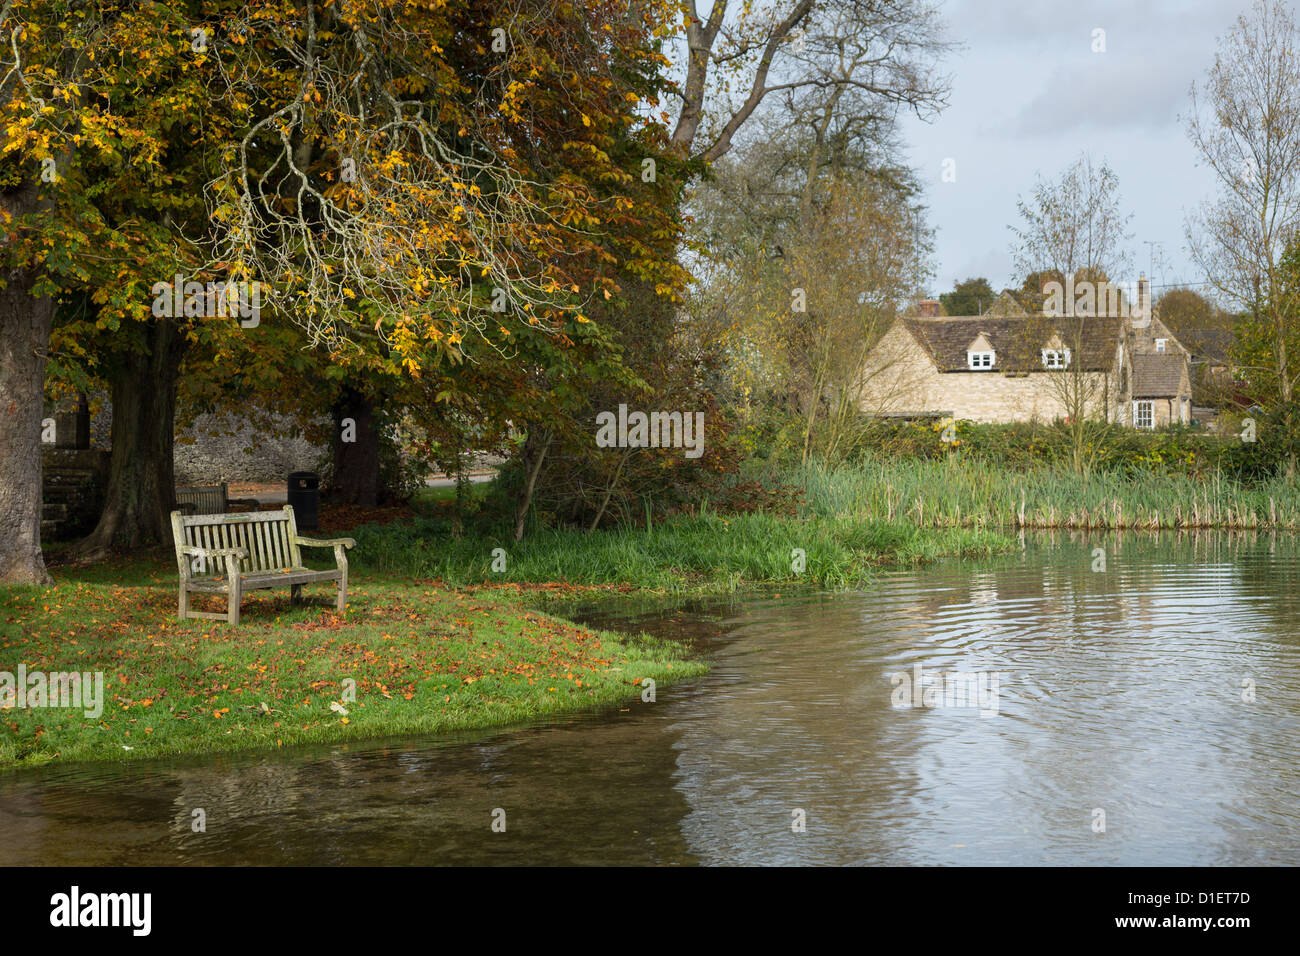 Seat overlooking a deep river at road ford on Shill Brook at Shilton Oxfordshire Stock Photo